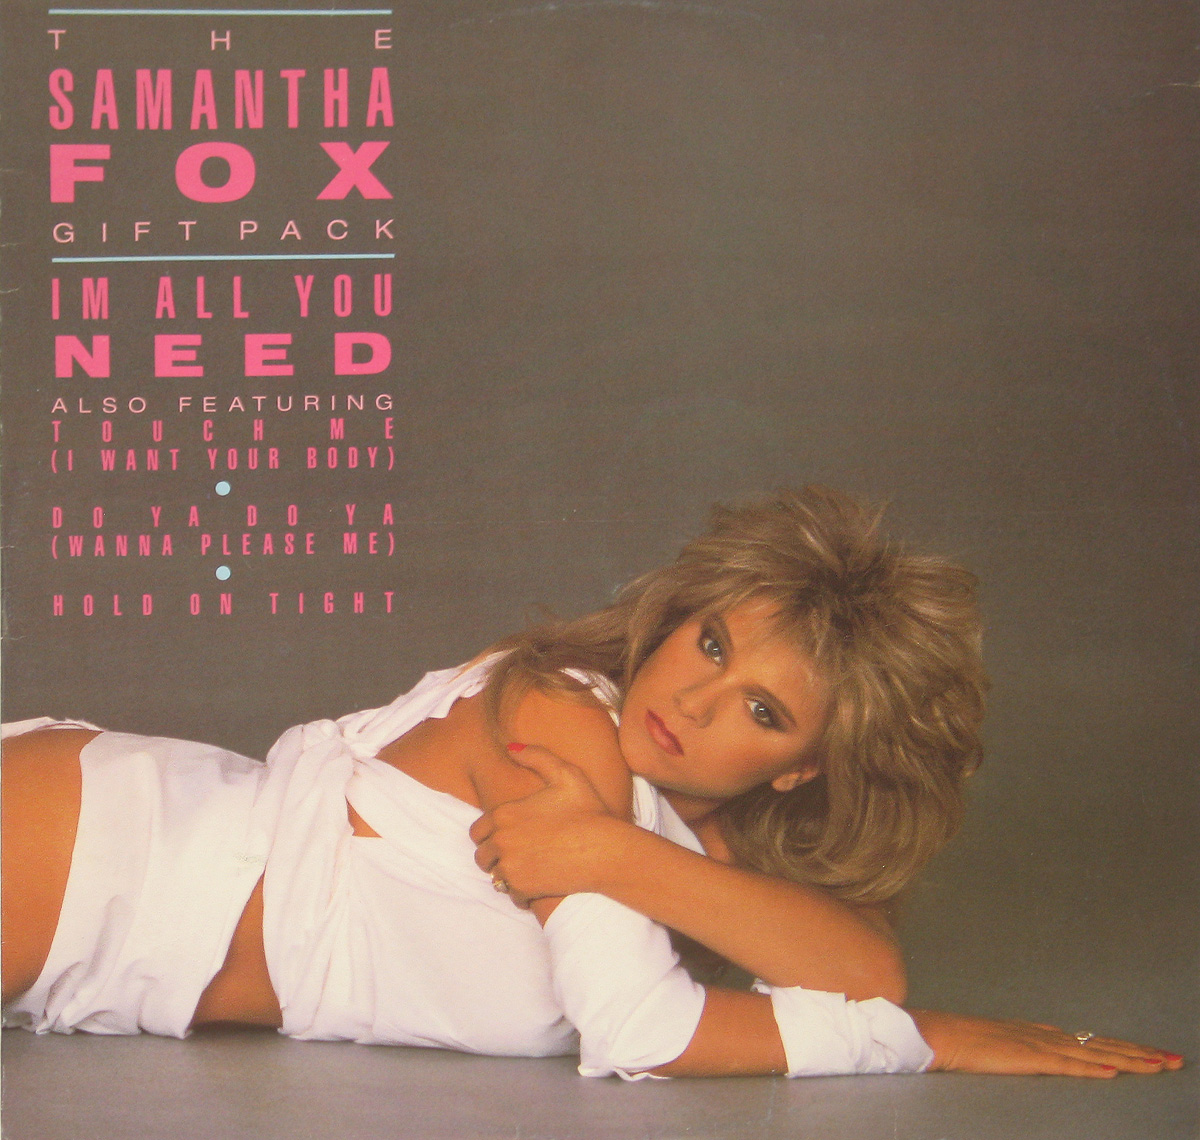 Pictures of samantha fox